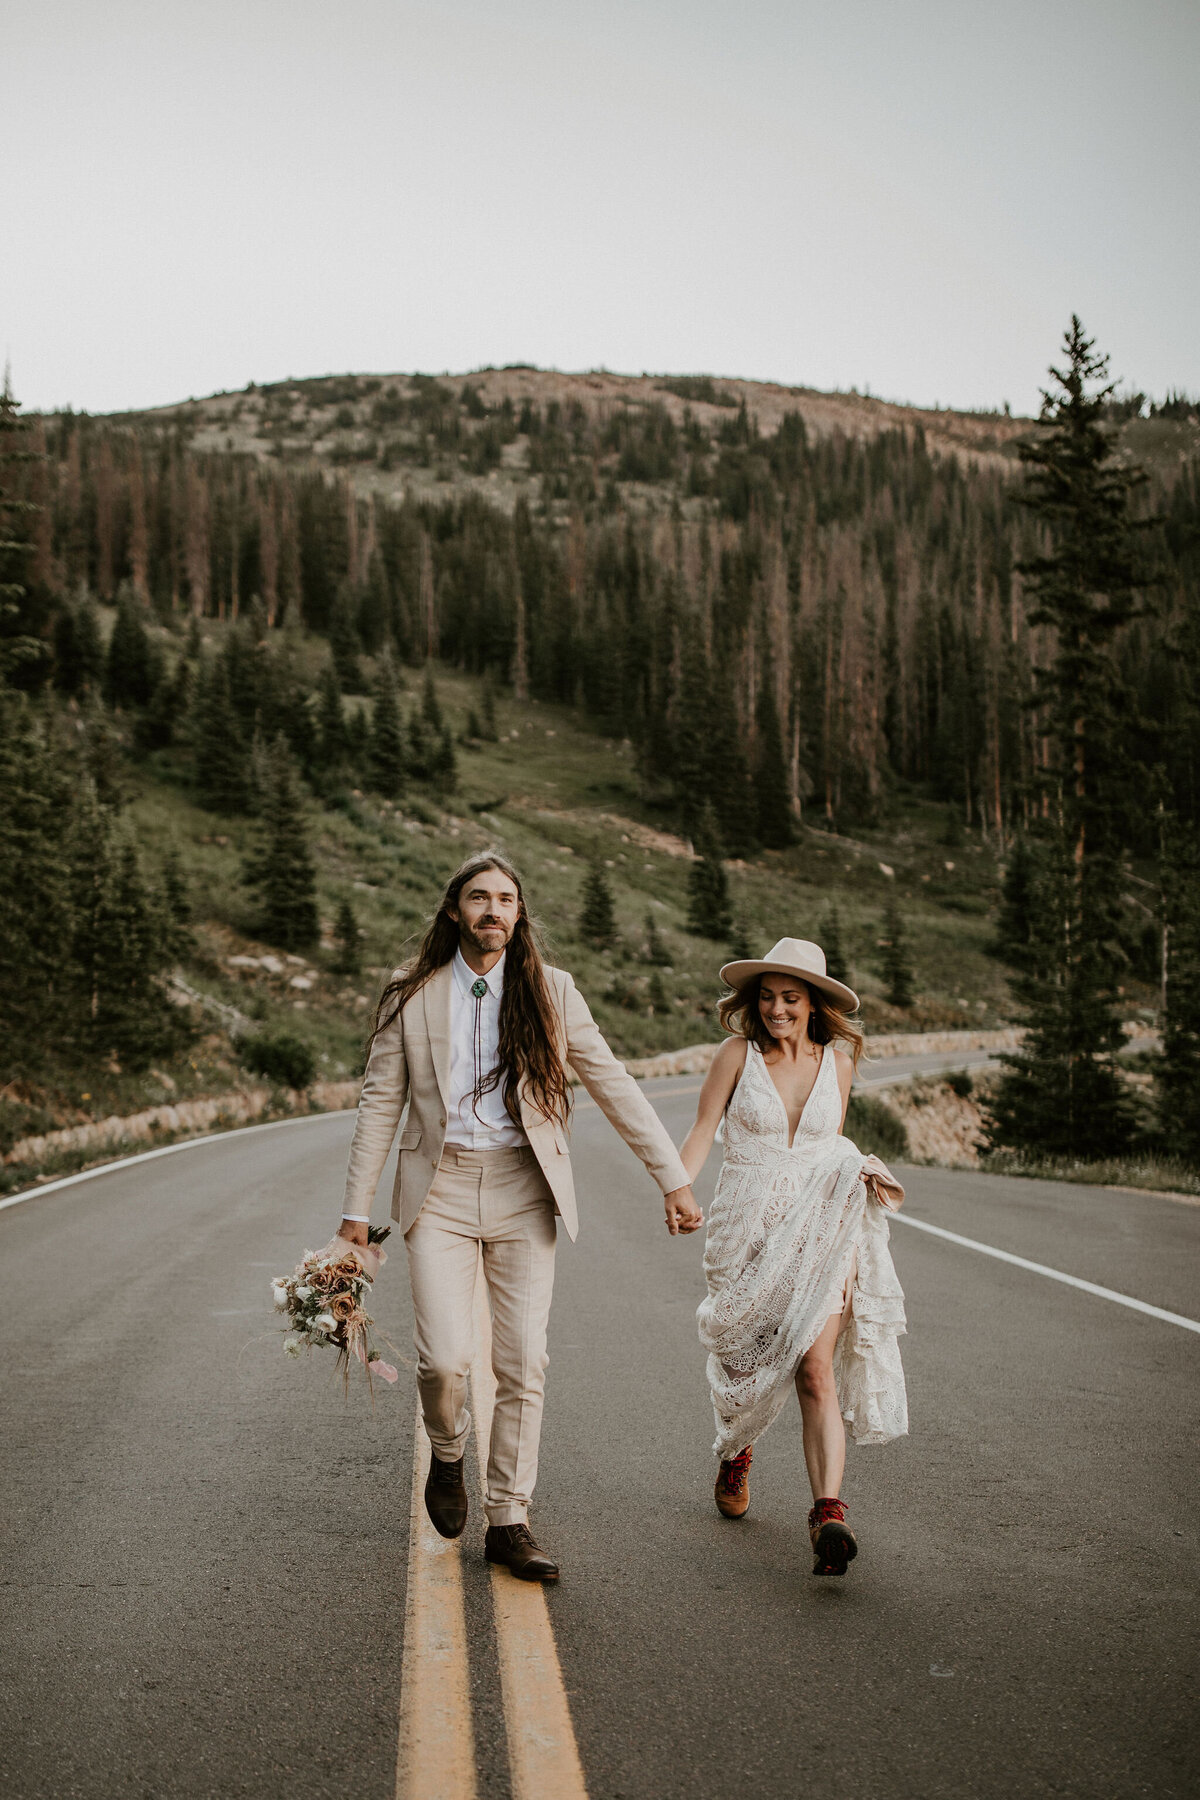 Bride and groom wearing an ivory suit and wedding gown walking on a mountainous road holding hands.